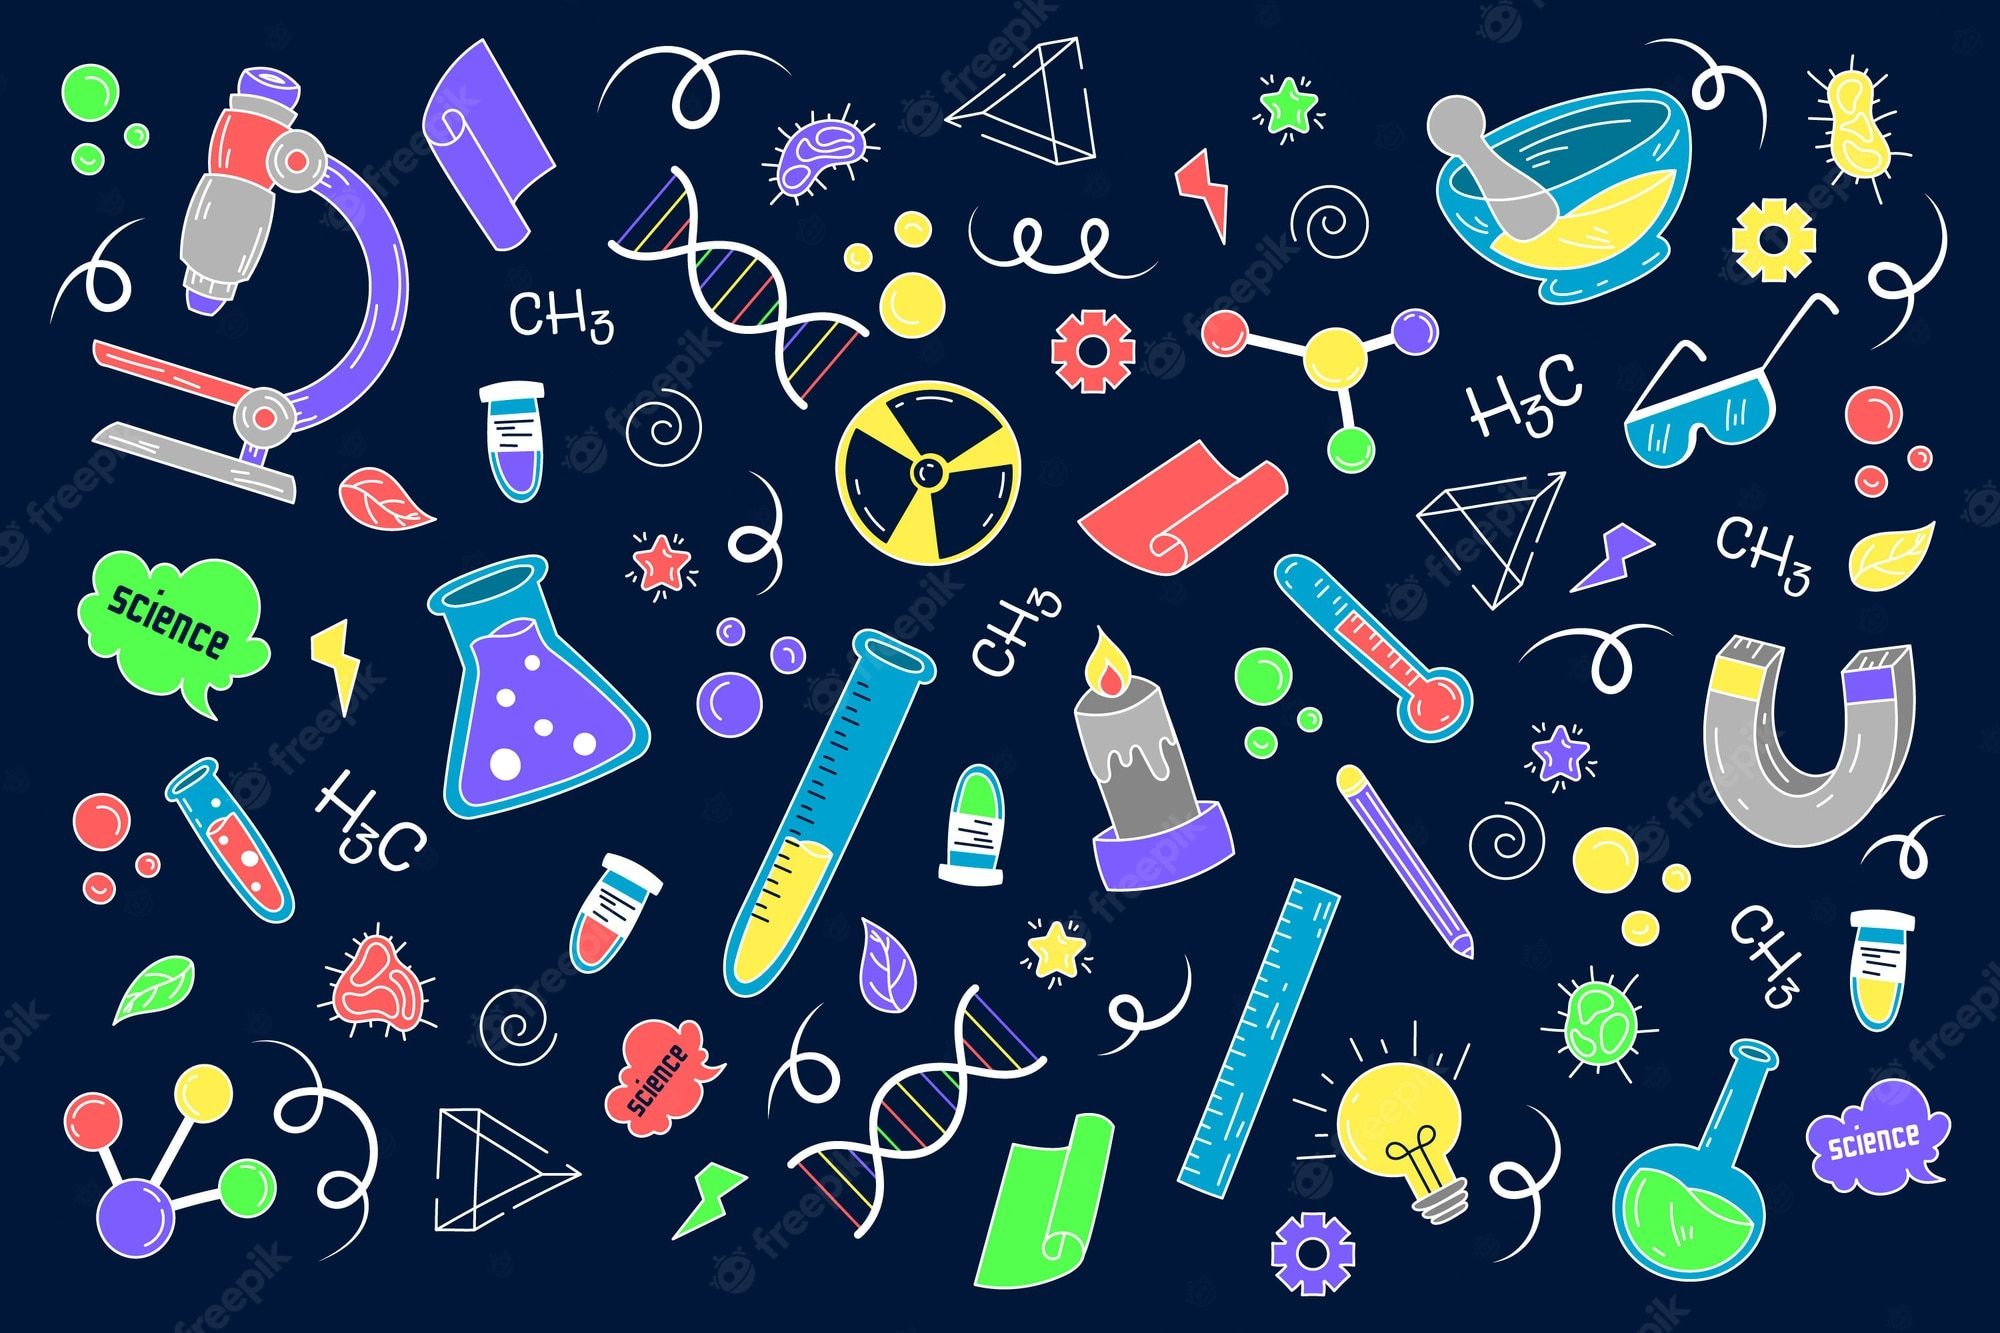 Science elements on a dark blue background - Science, chemistry